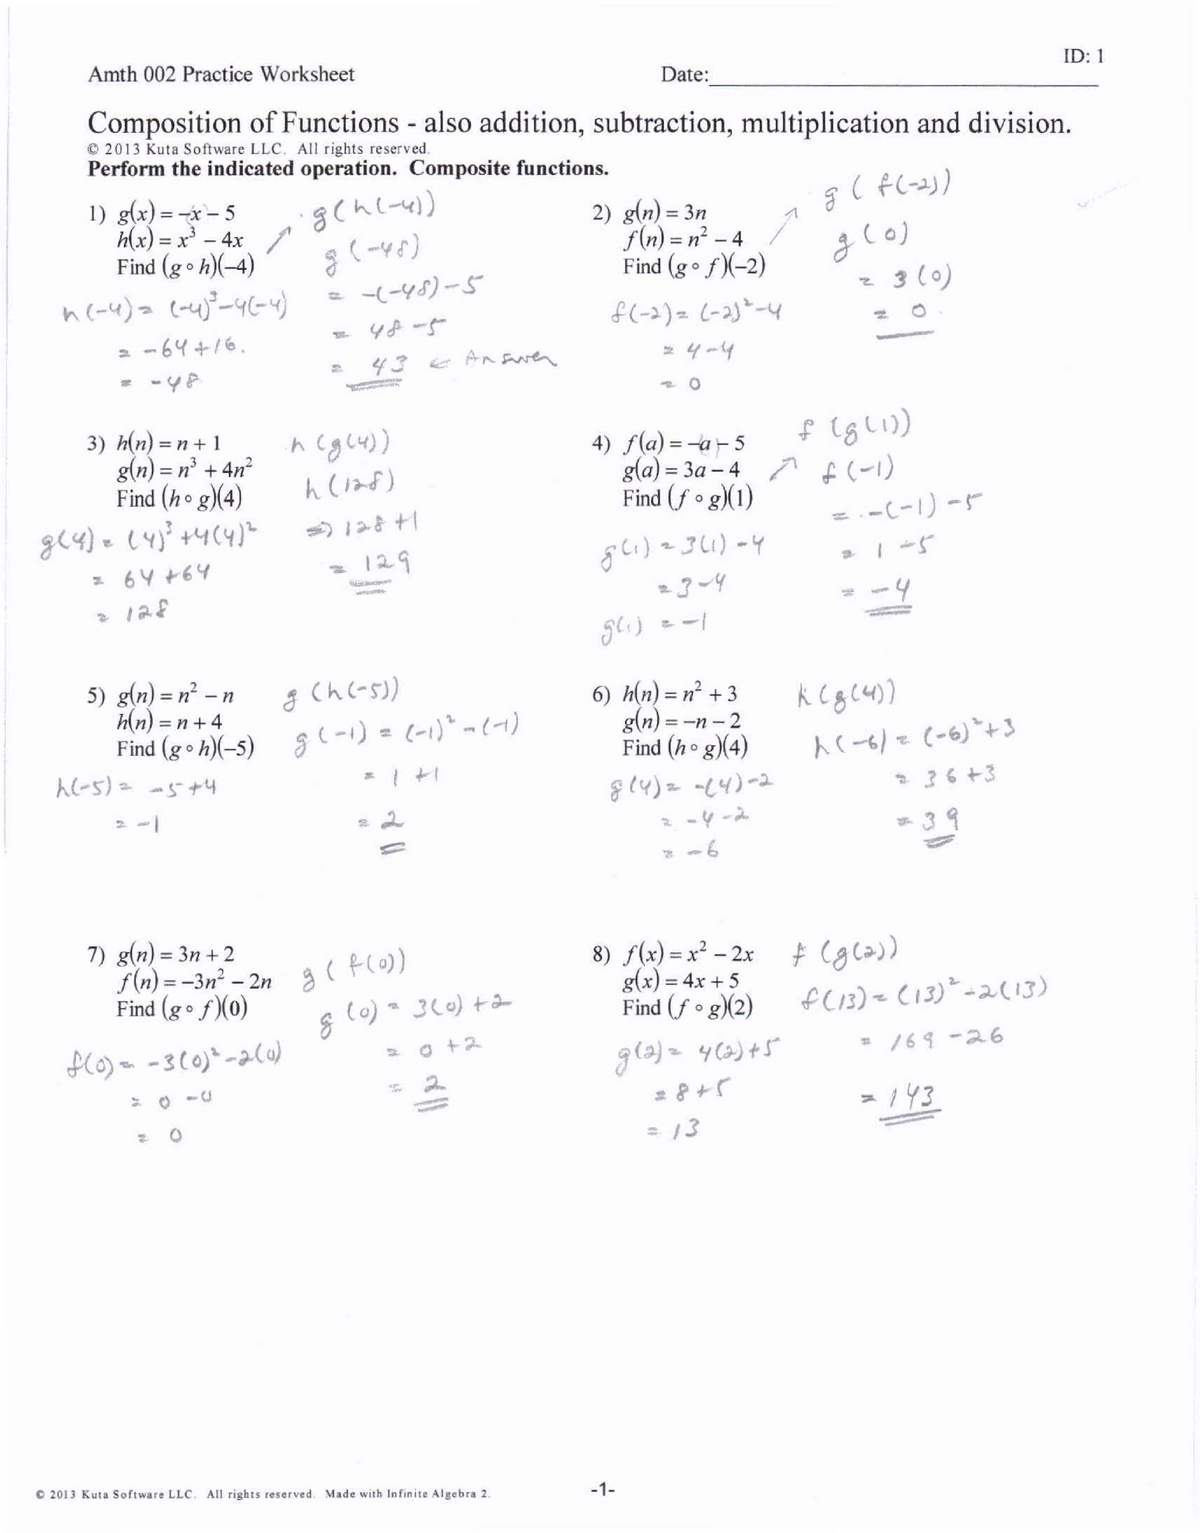 Composition of Functions Answers - AMTH 25 - Mathematics II - UR Pertaining To Composition Of Functions Worksheet Answers